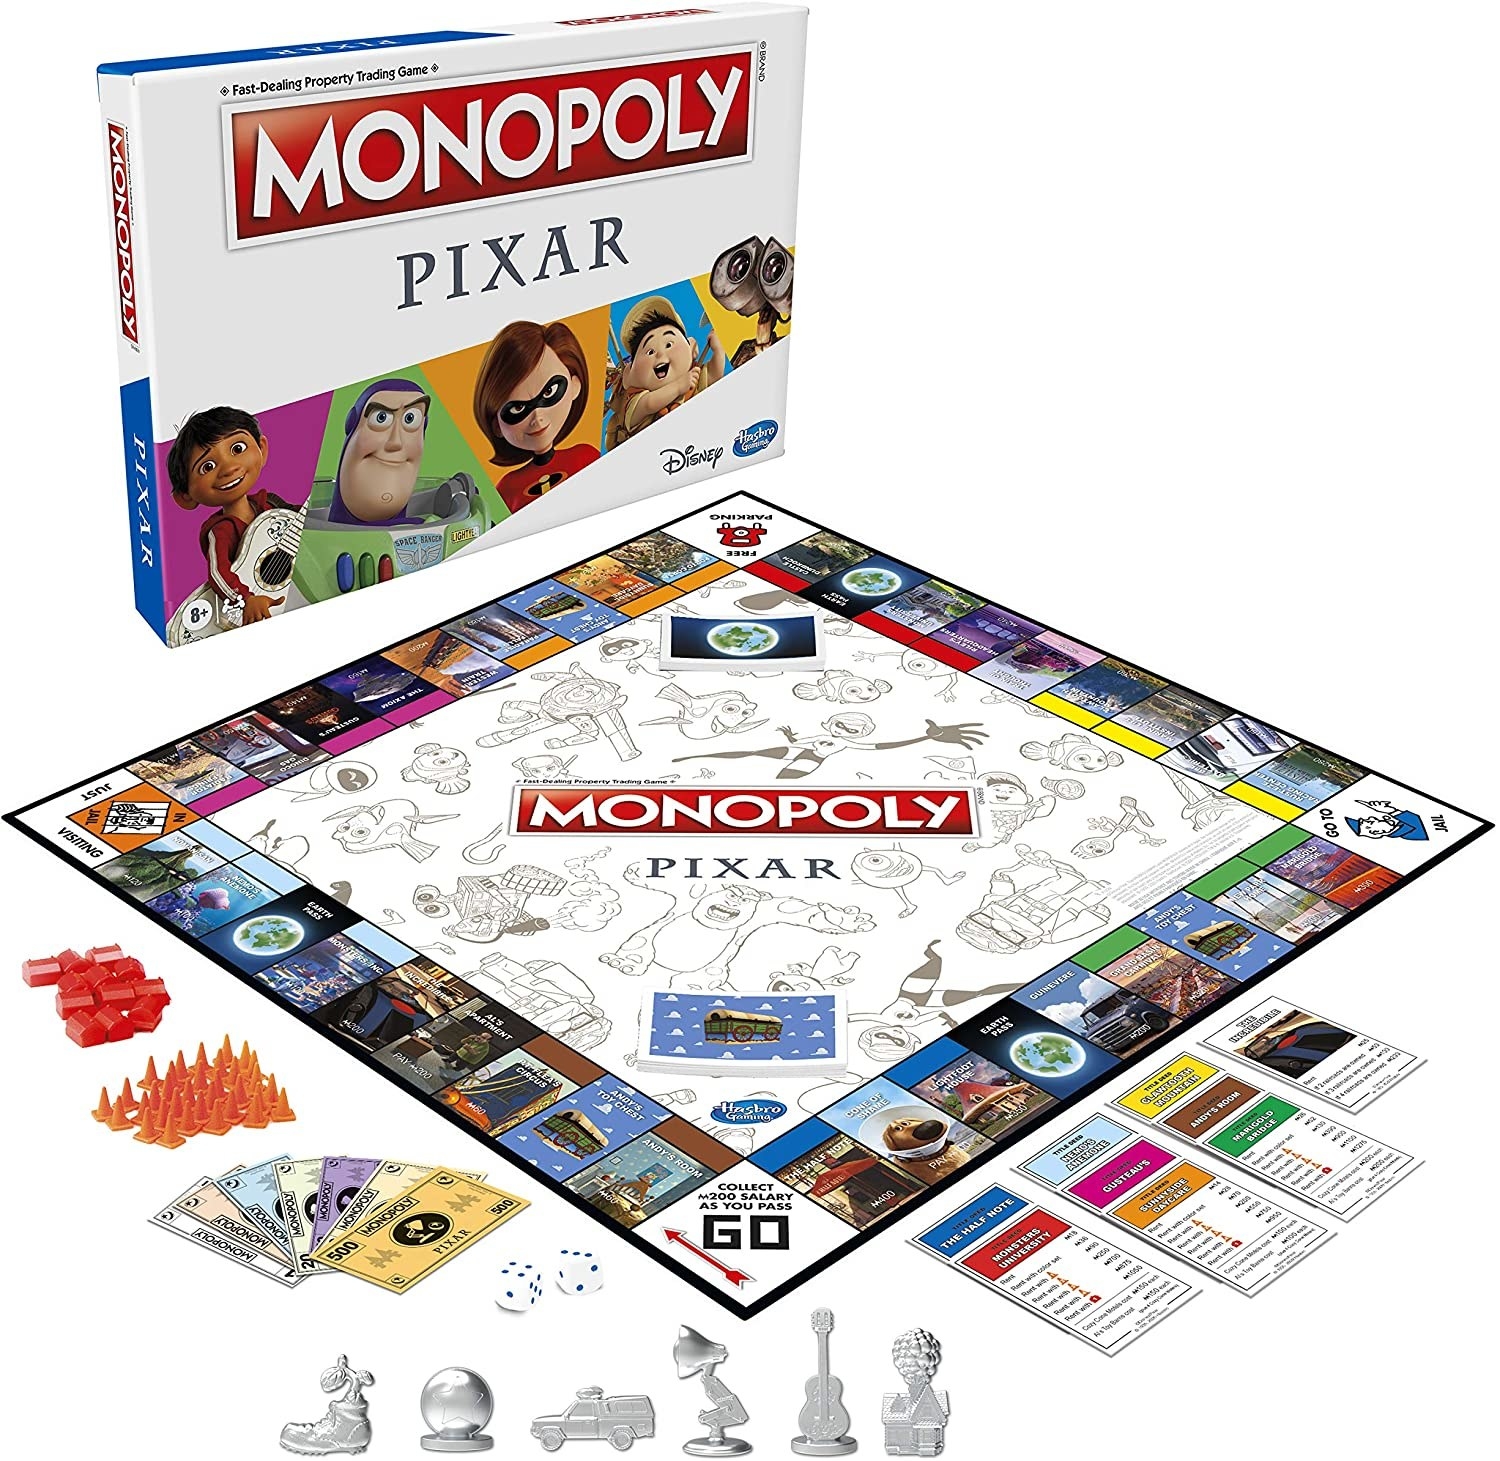 the pixar themed board game